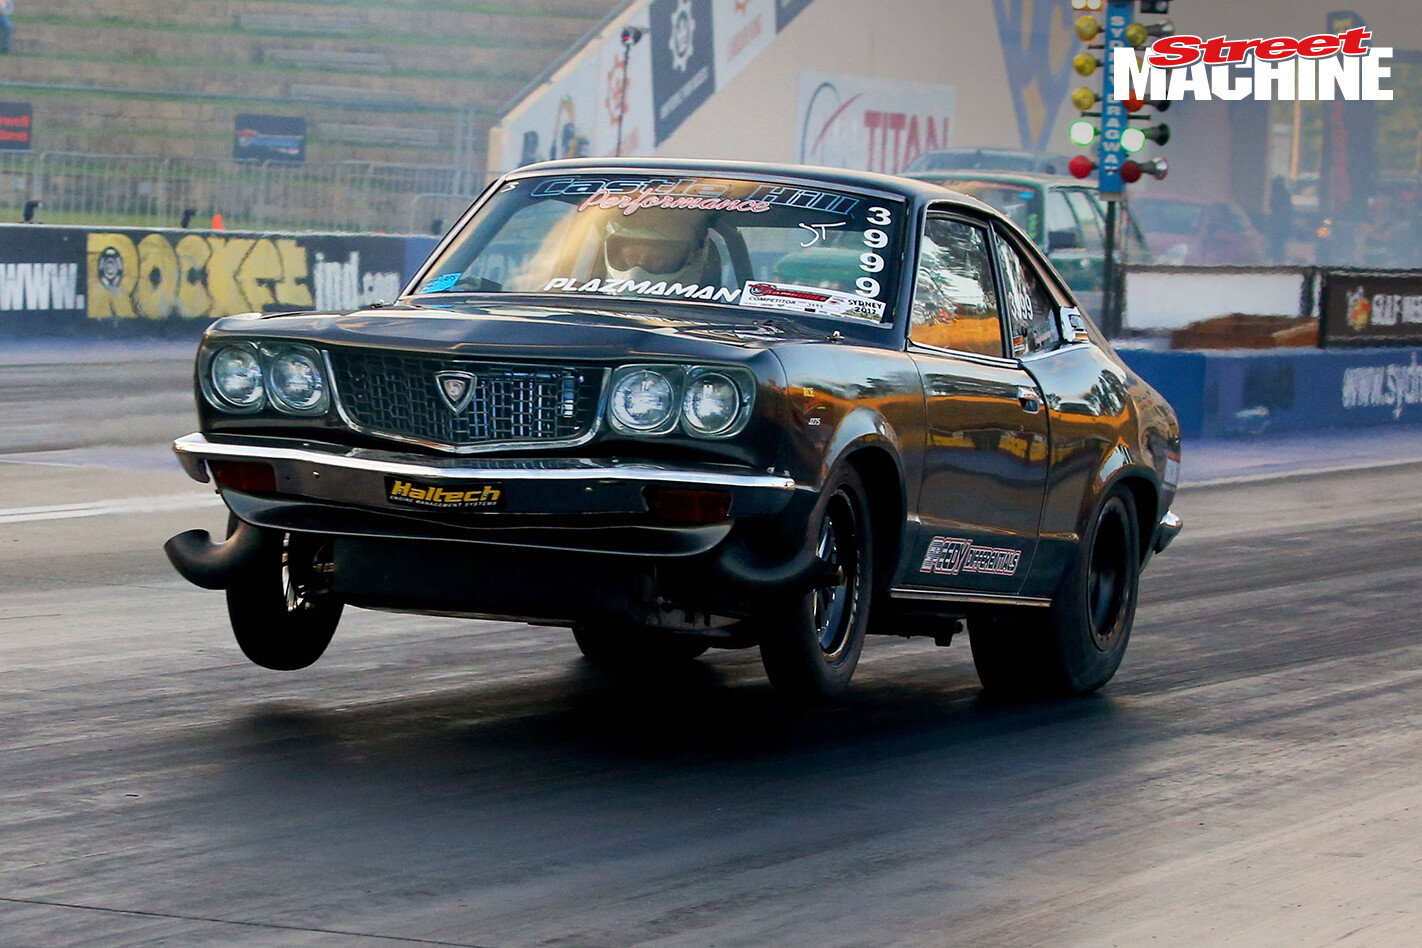 CASTLE HILL EXHAUST & PERFORMANCE 427 LS RX3 RESETS AUSSIE DRAG RECORD!